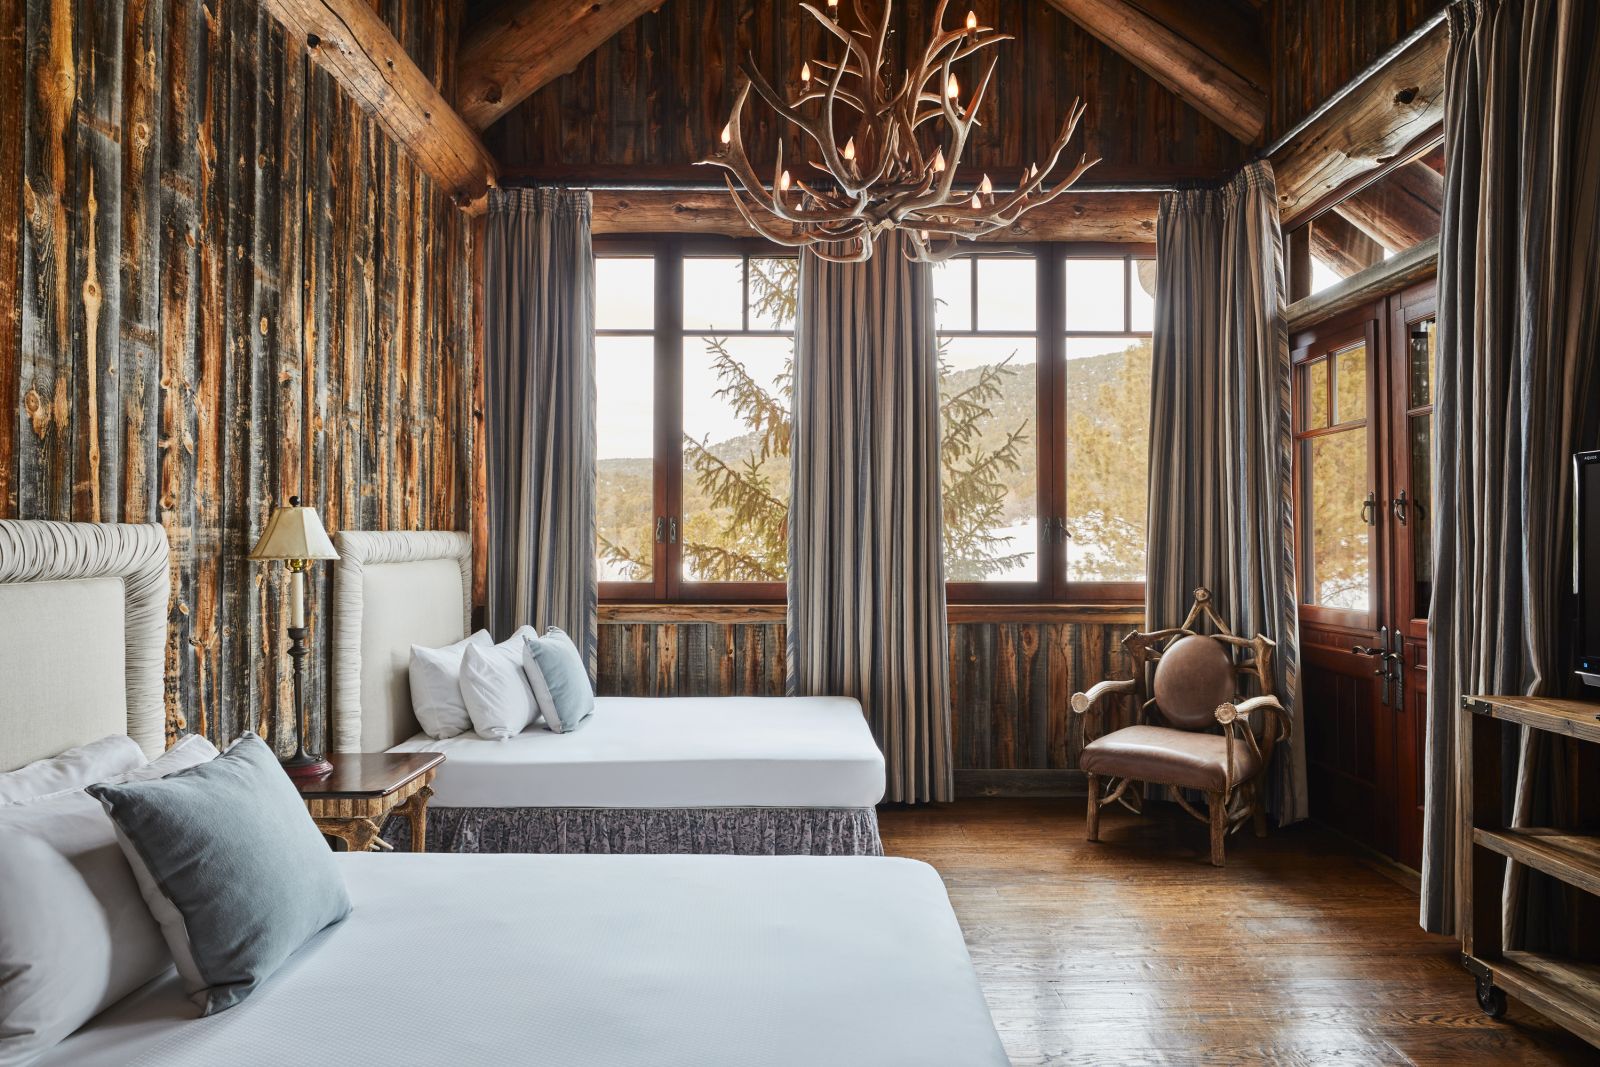 Western guest suite at Sleeping Indian Lodge in Colorado in the USA